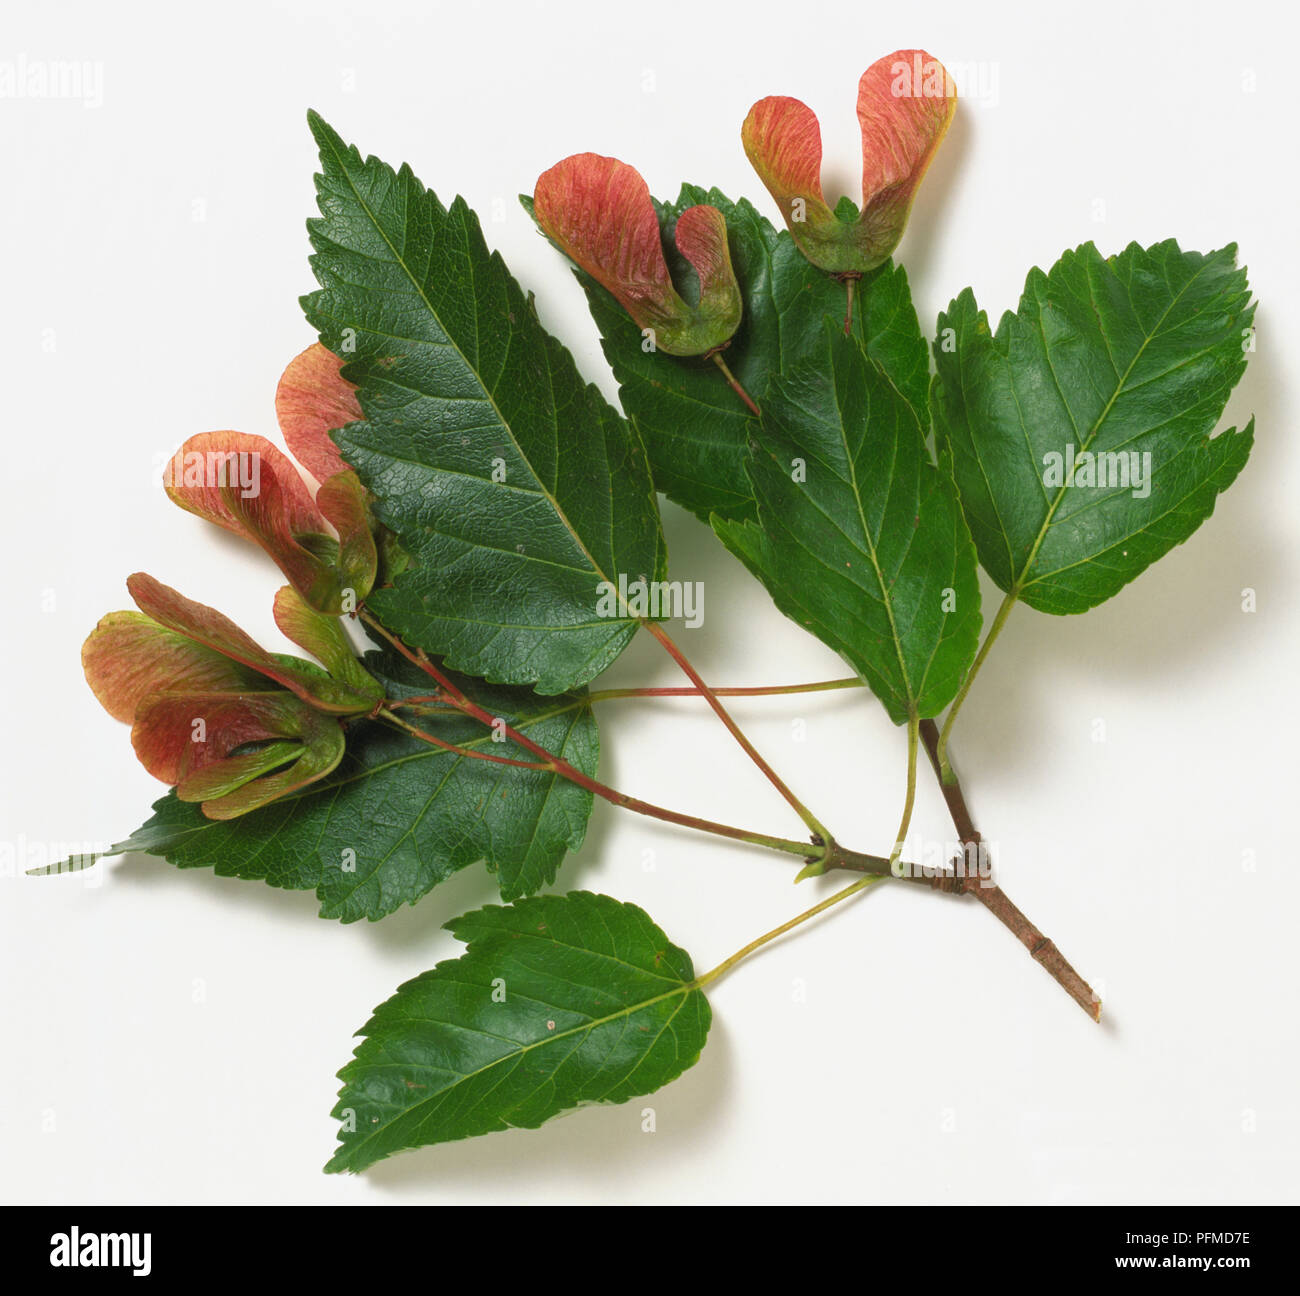 Aceraceae, Acer tataricum subsp. ginuala, Amur Maple, branch tip bearing glossy dark green toothed leaves and clusters of green and red winged fruits. Stock Photo